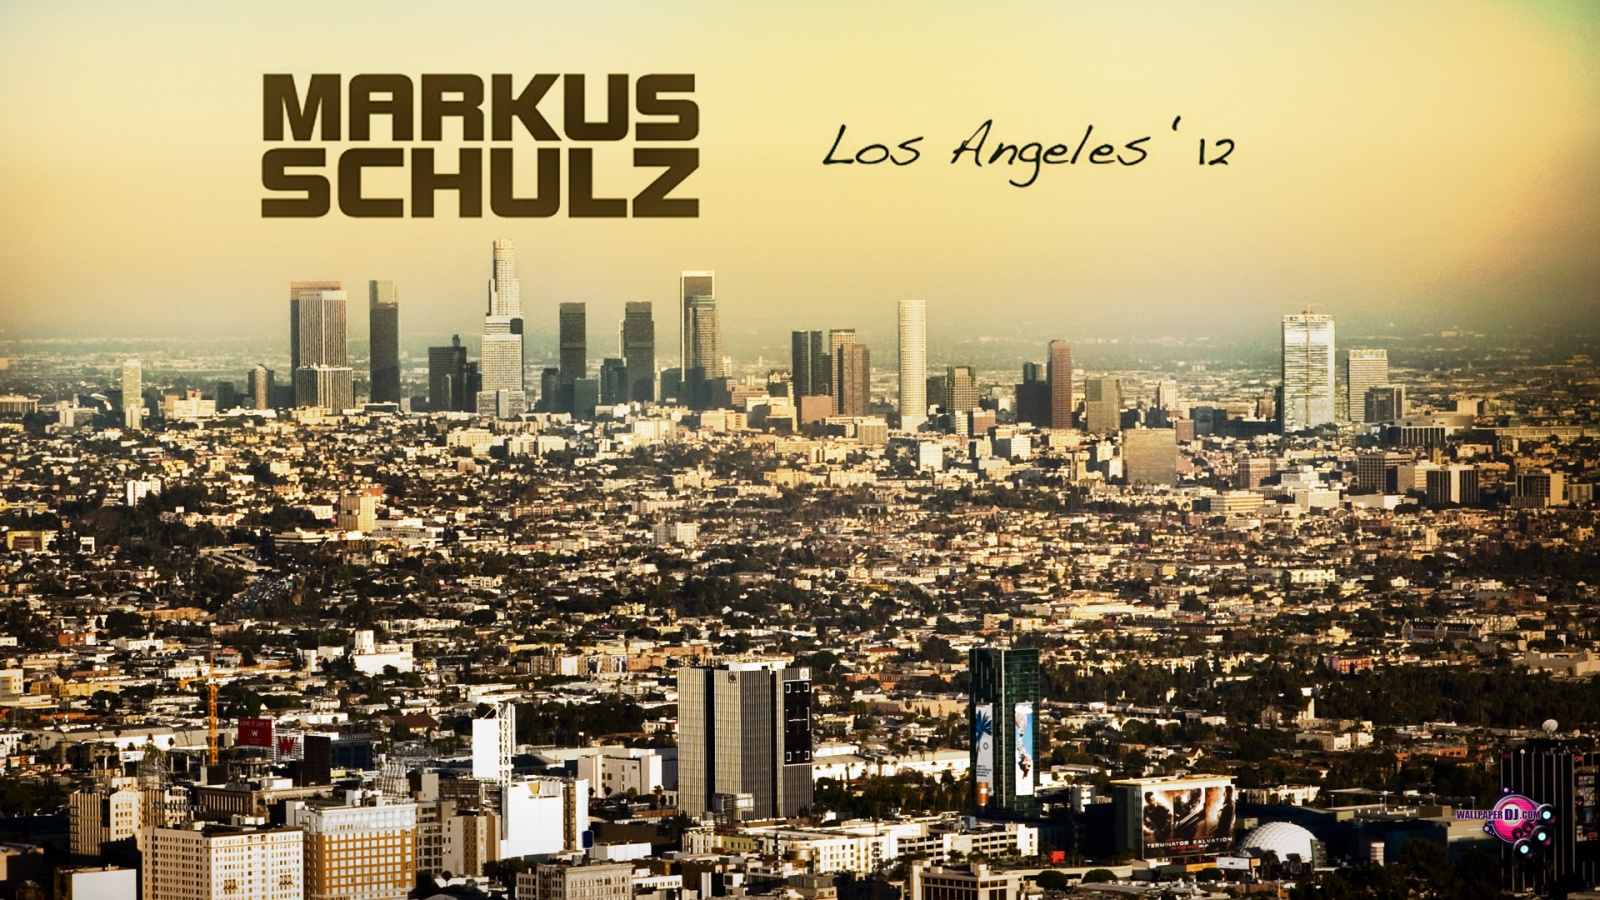 Markus Schulz Los Angeles '12 HD and Wide Wallpapers